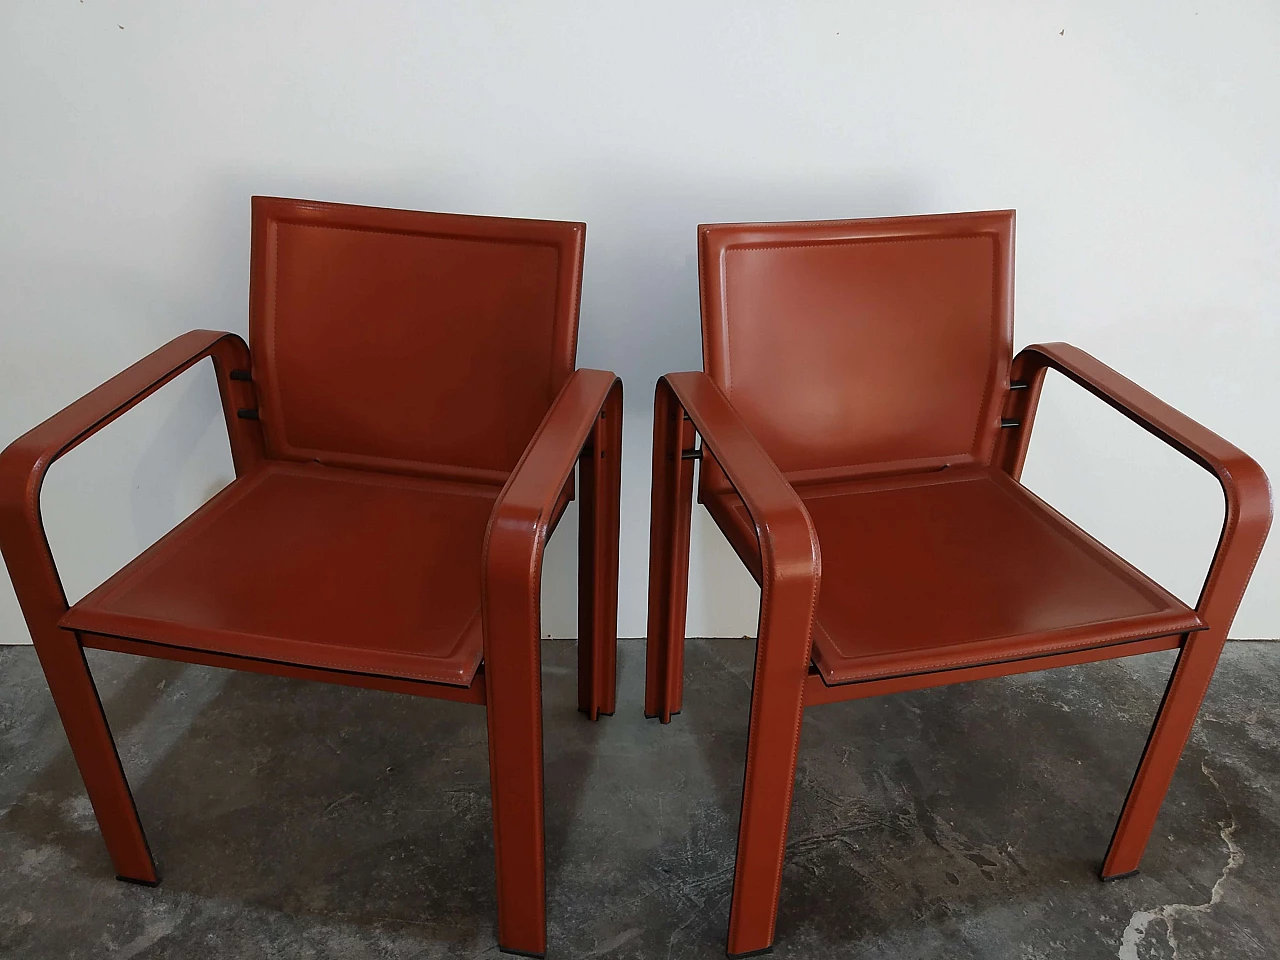 Pair of Golfo dei Poeti chairs by Toussaint & Angeloni manufactured by Matteo Grassi, 1980s 4